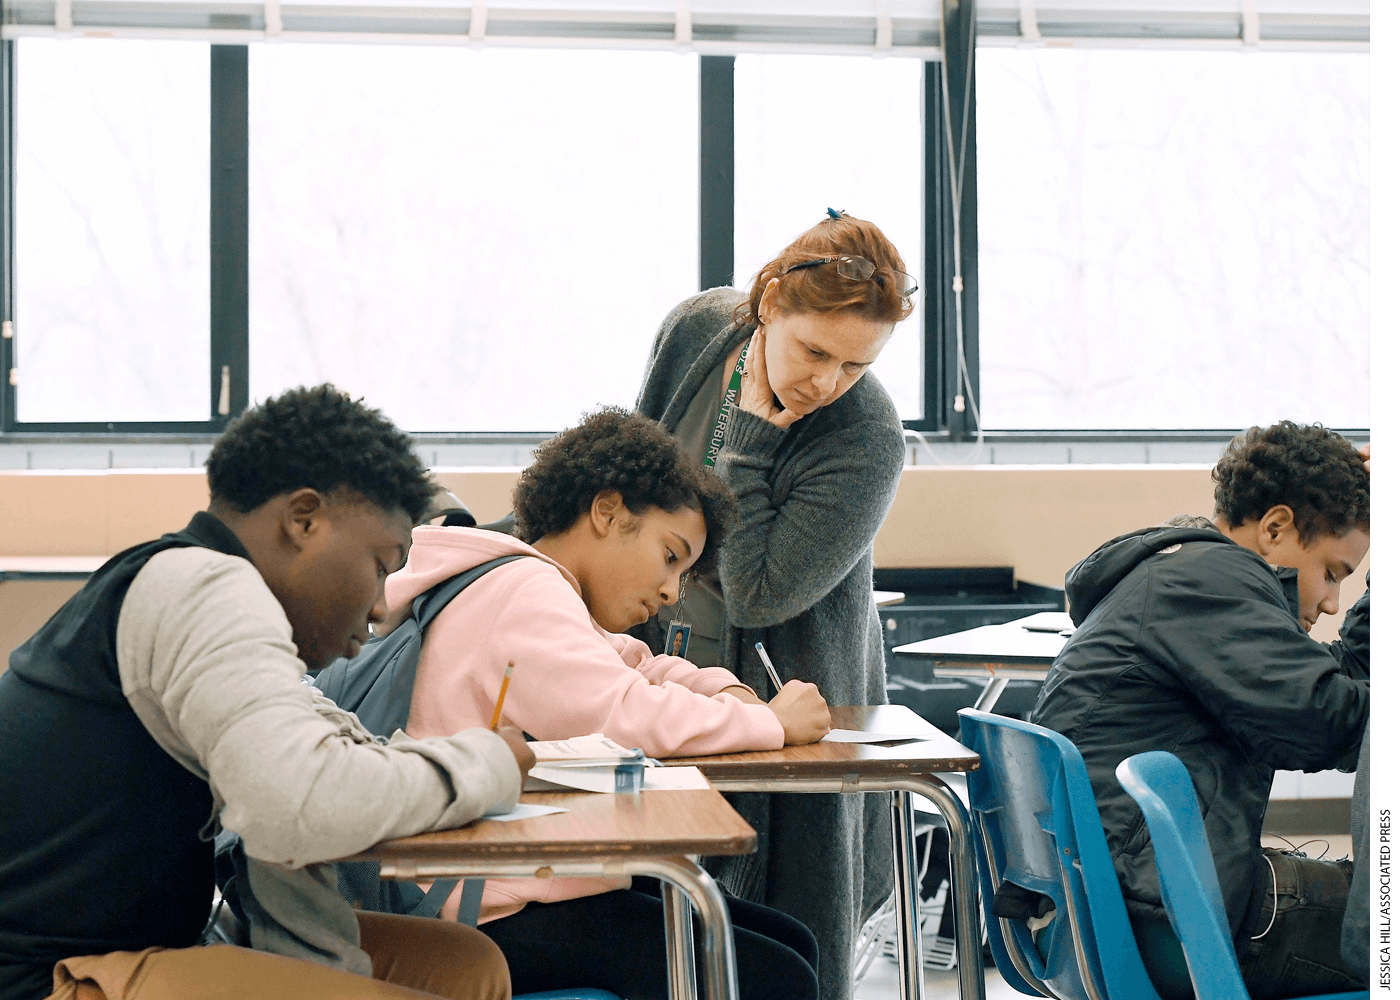 At Crosby High School in Waterbury, Connecticut, Jennifer Desiderio works with an Algebra student. Nationwide, 79 percent of all teachers are white compared to 44 percent of students.